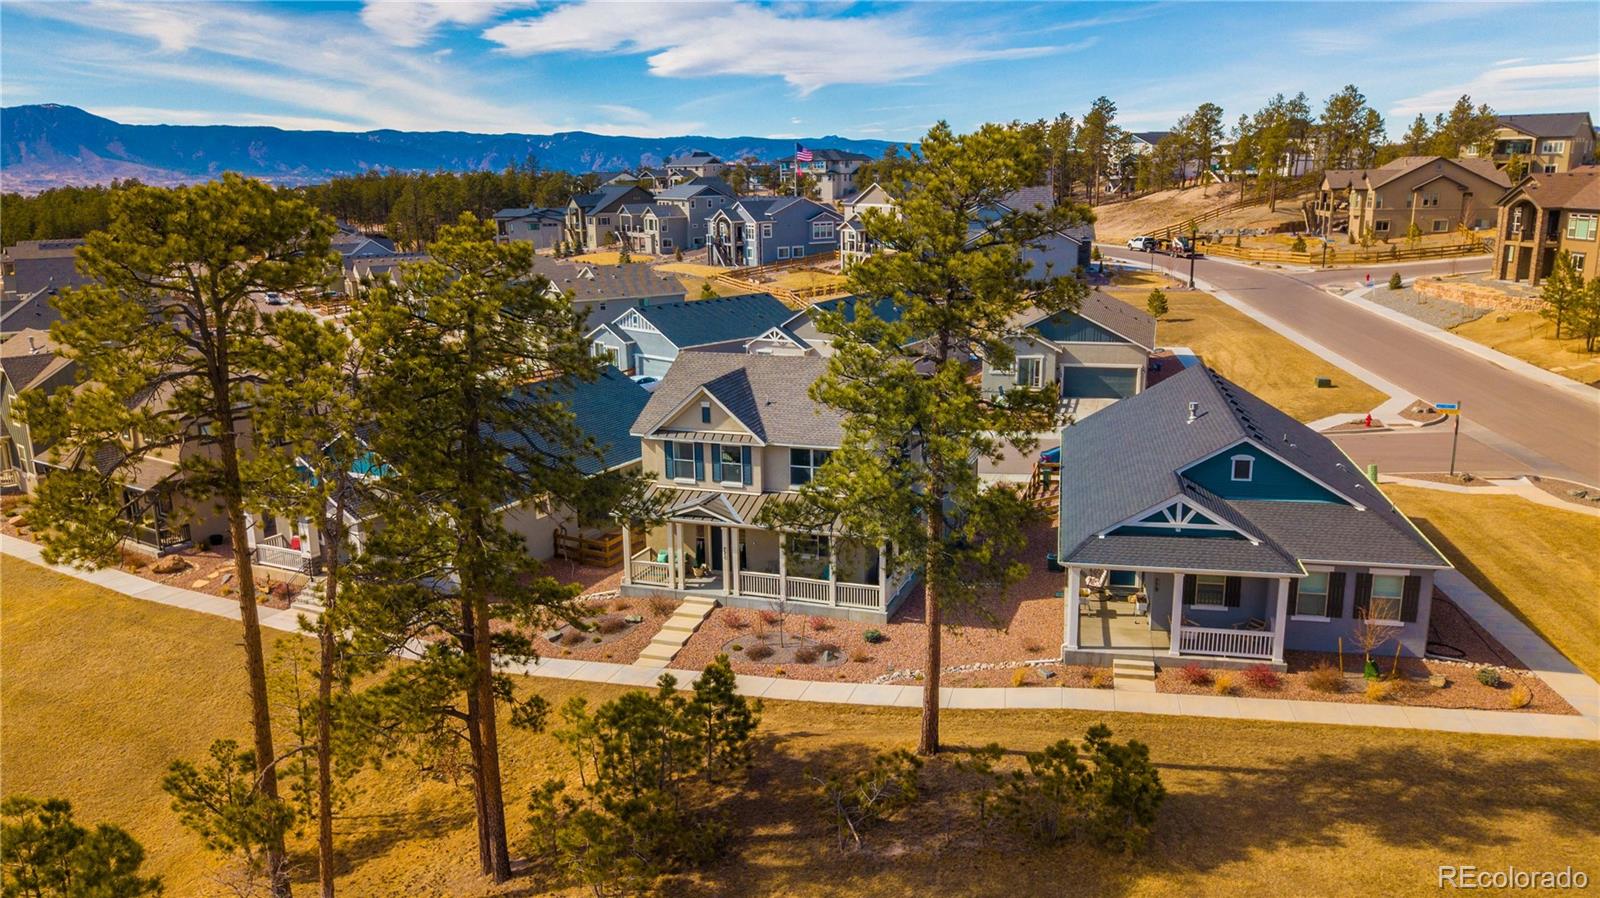 771 Sage Forest Lane, Monument, CO 80132 - MLS#: 8482838